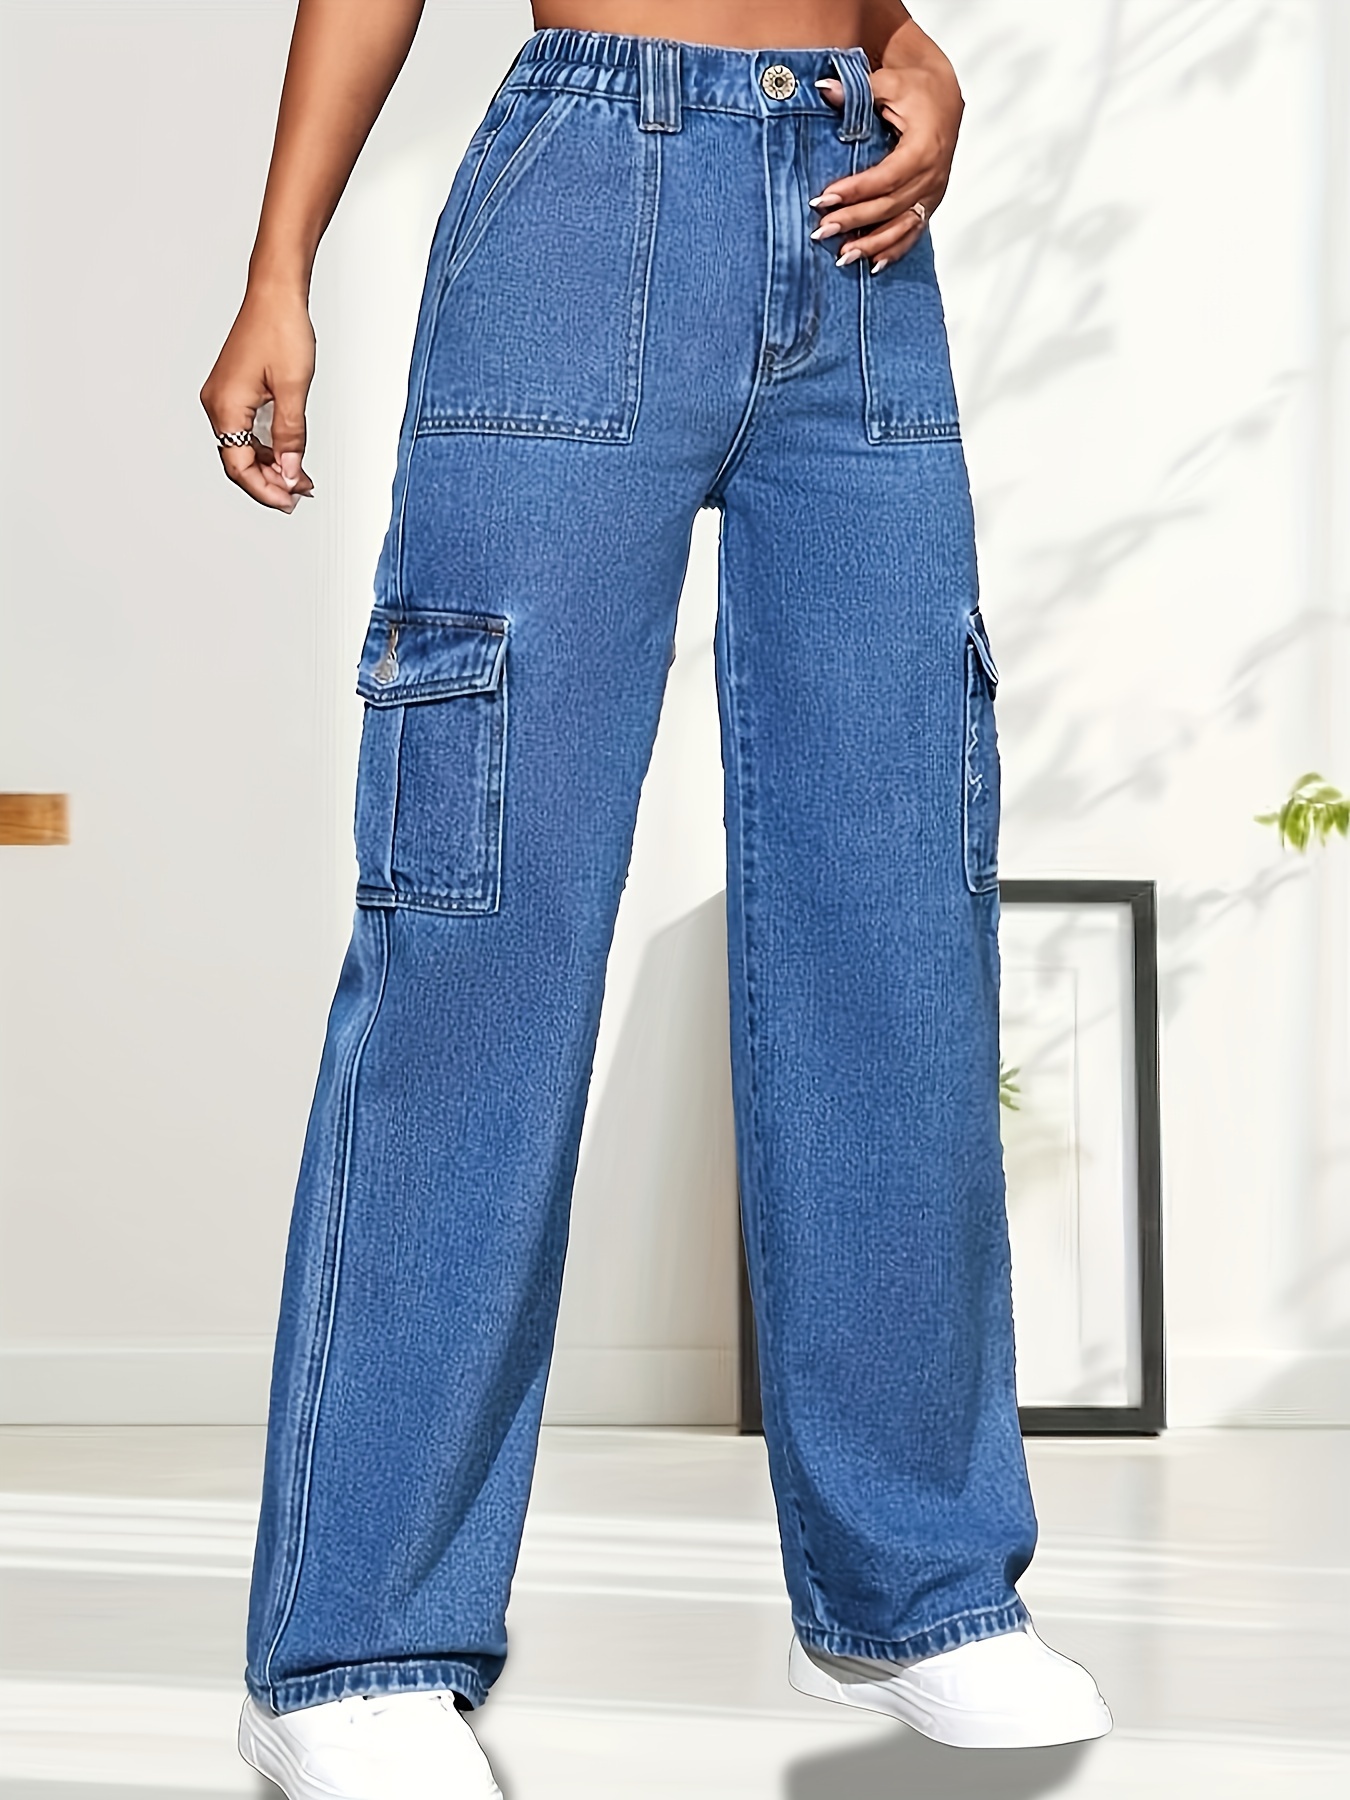 Blue Embroidered Pockets Bootcut Jeans *-Stretch Slim Fit Flap Pockets  Denim Trousers, Women's Denim Jeans & Clothing